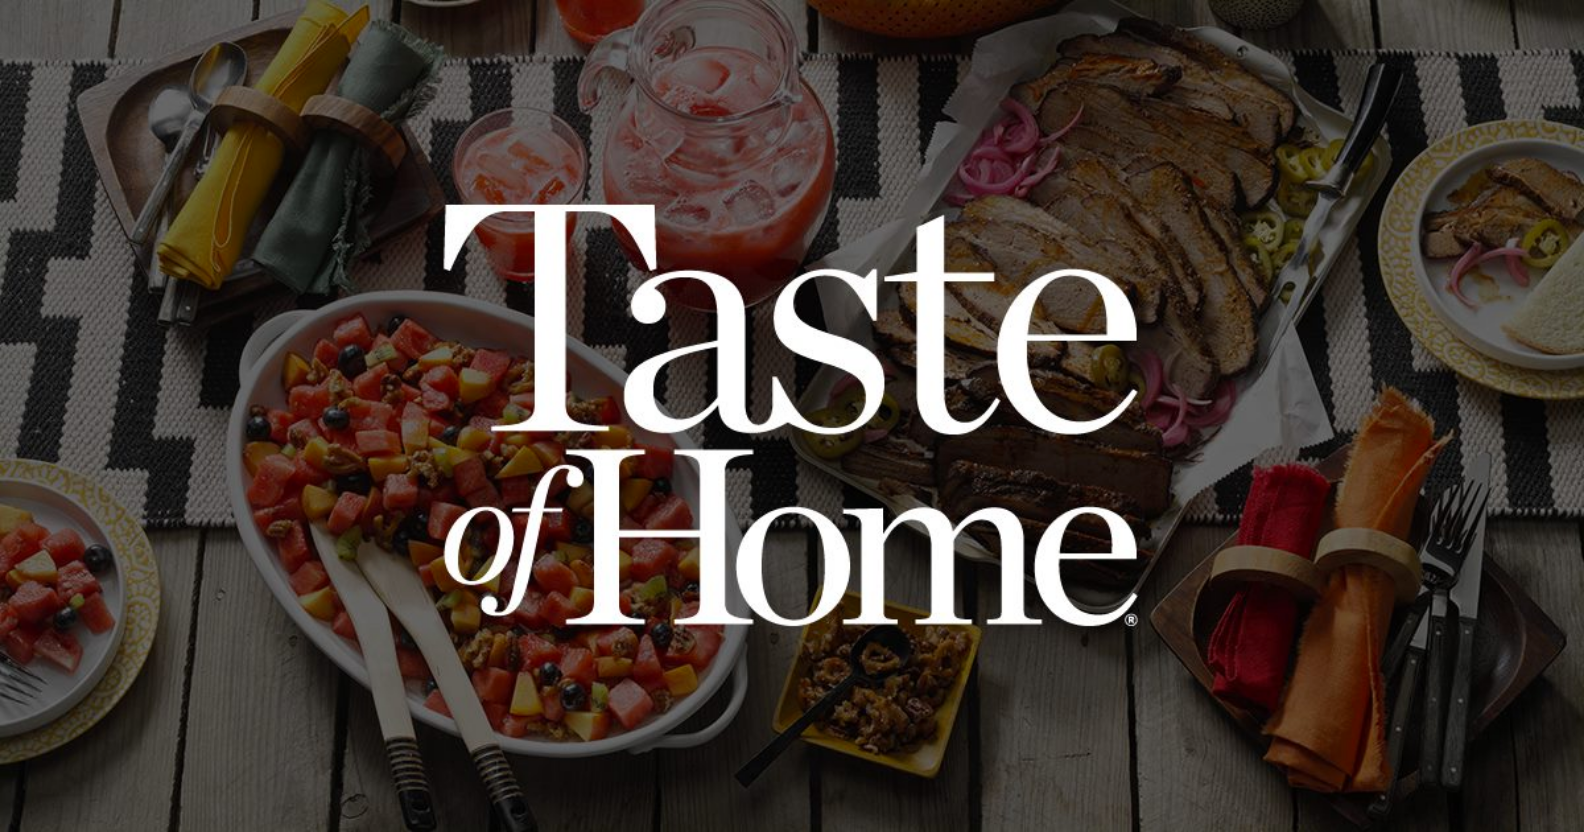 https://www.tasteofhome.com/wp-content/themes/bumblebee-toh-child/images/recipes/Image-69-2x.png